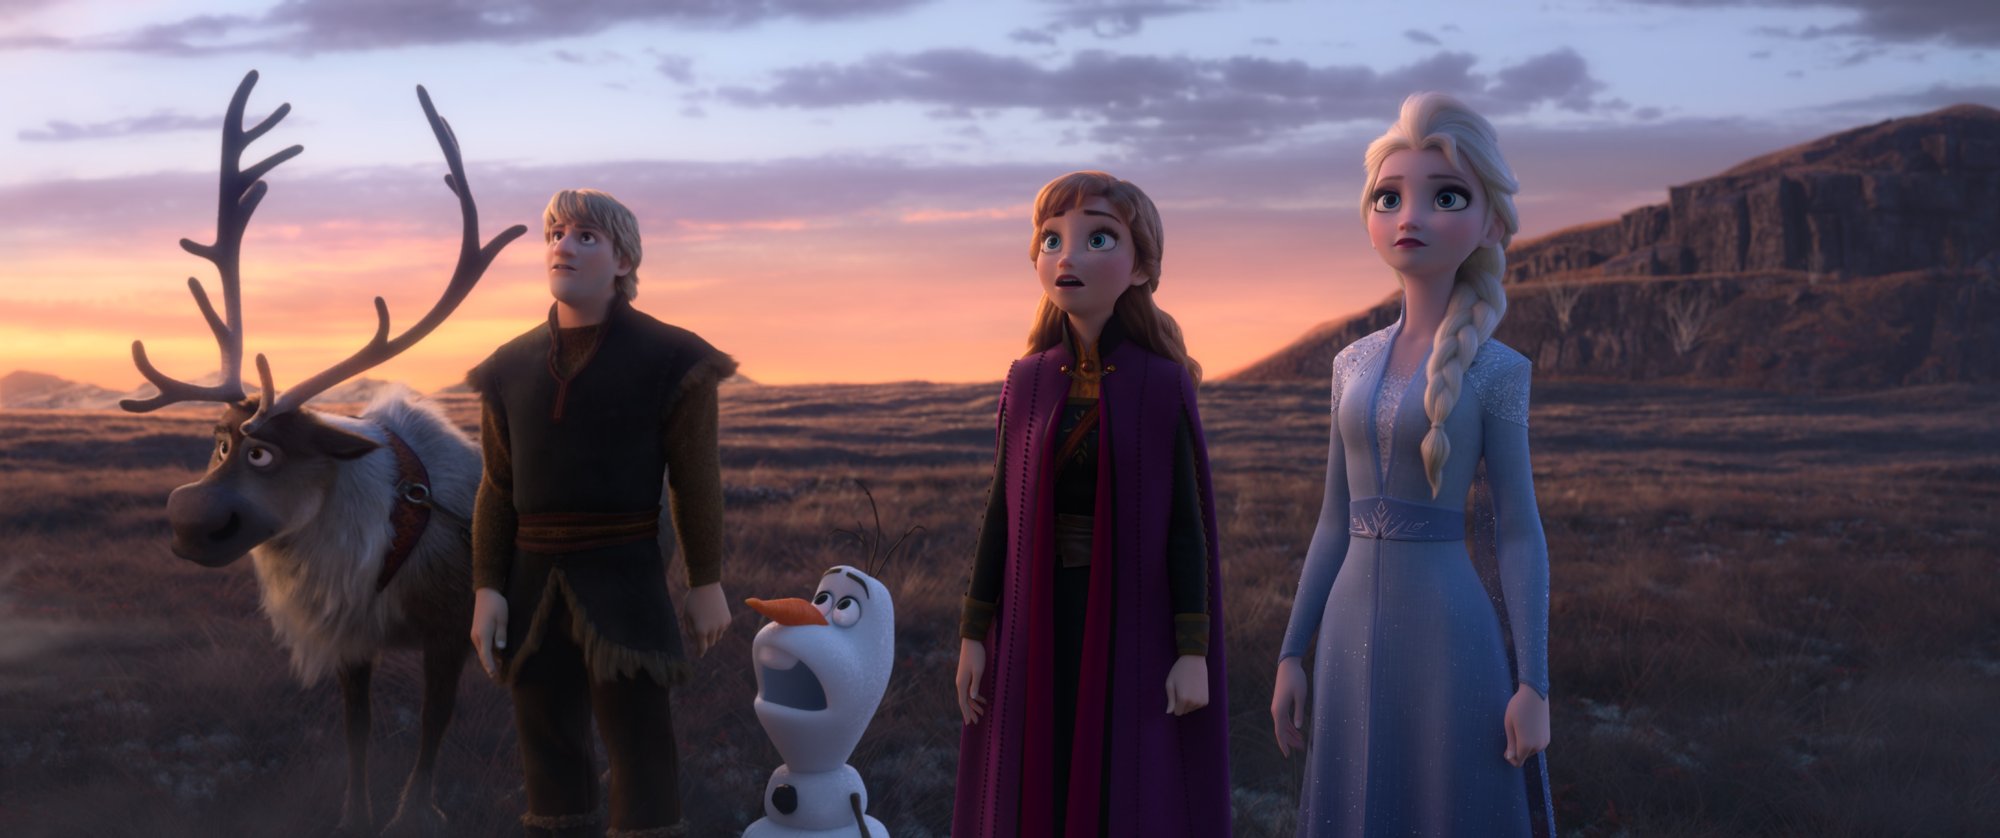 Sven, Kristoff, Olaf, Anna and Elsa from Walt Disney Pictures' Frozen II (2019)